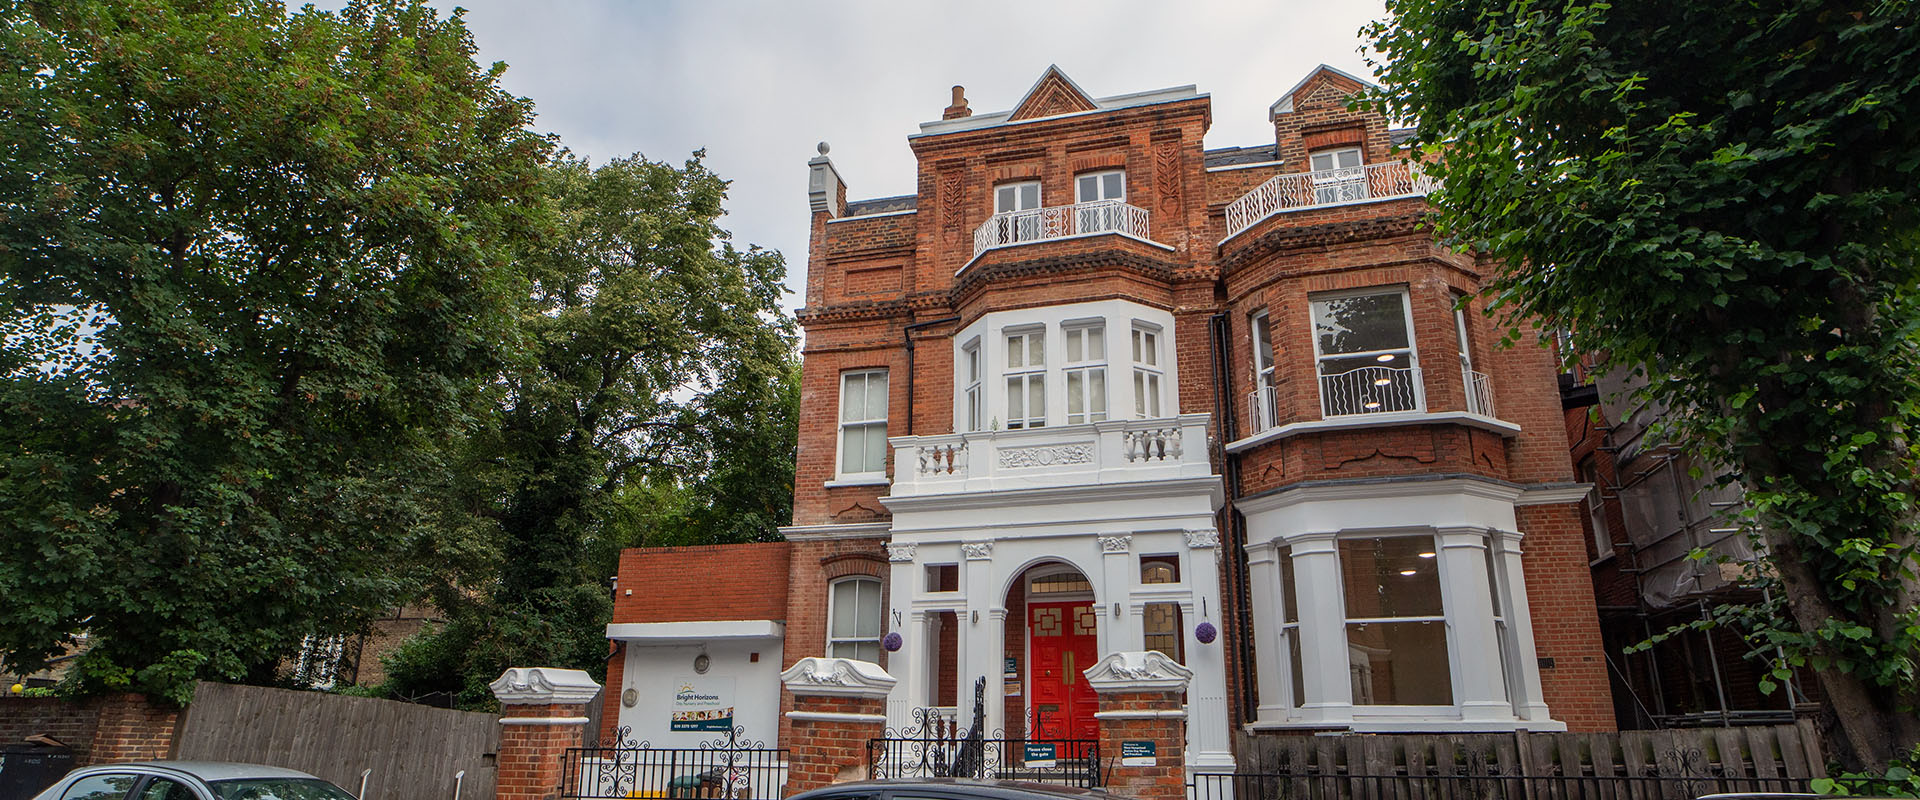 Bright Horizons West Hampstead Station Day Nursery and Preschool